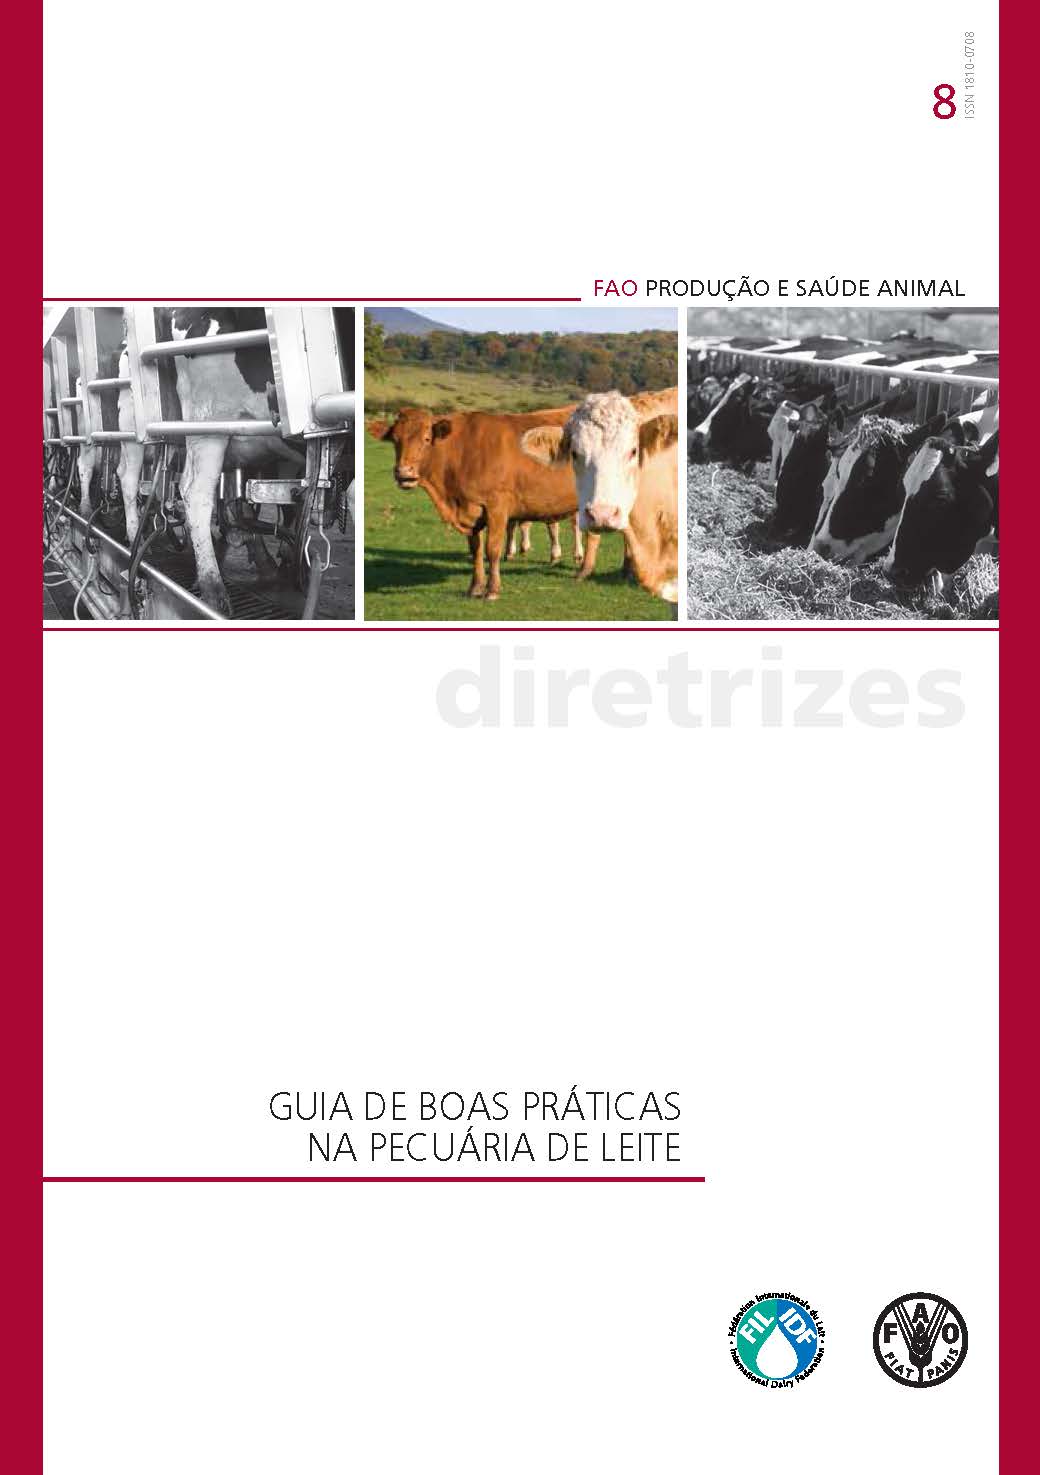 Guide to Good Dairy Farming Practice in Portuguese (2011) - FIL-IDF